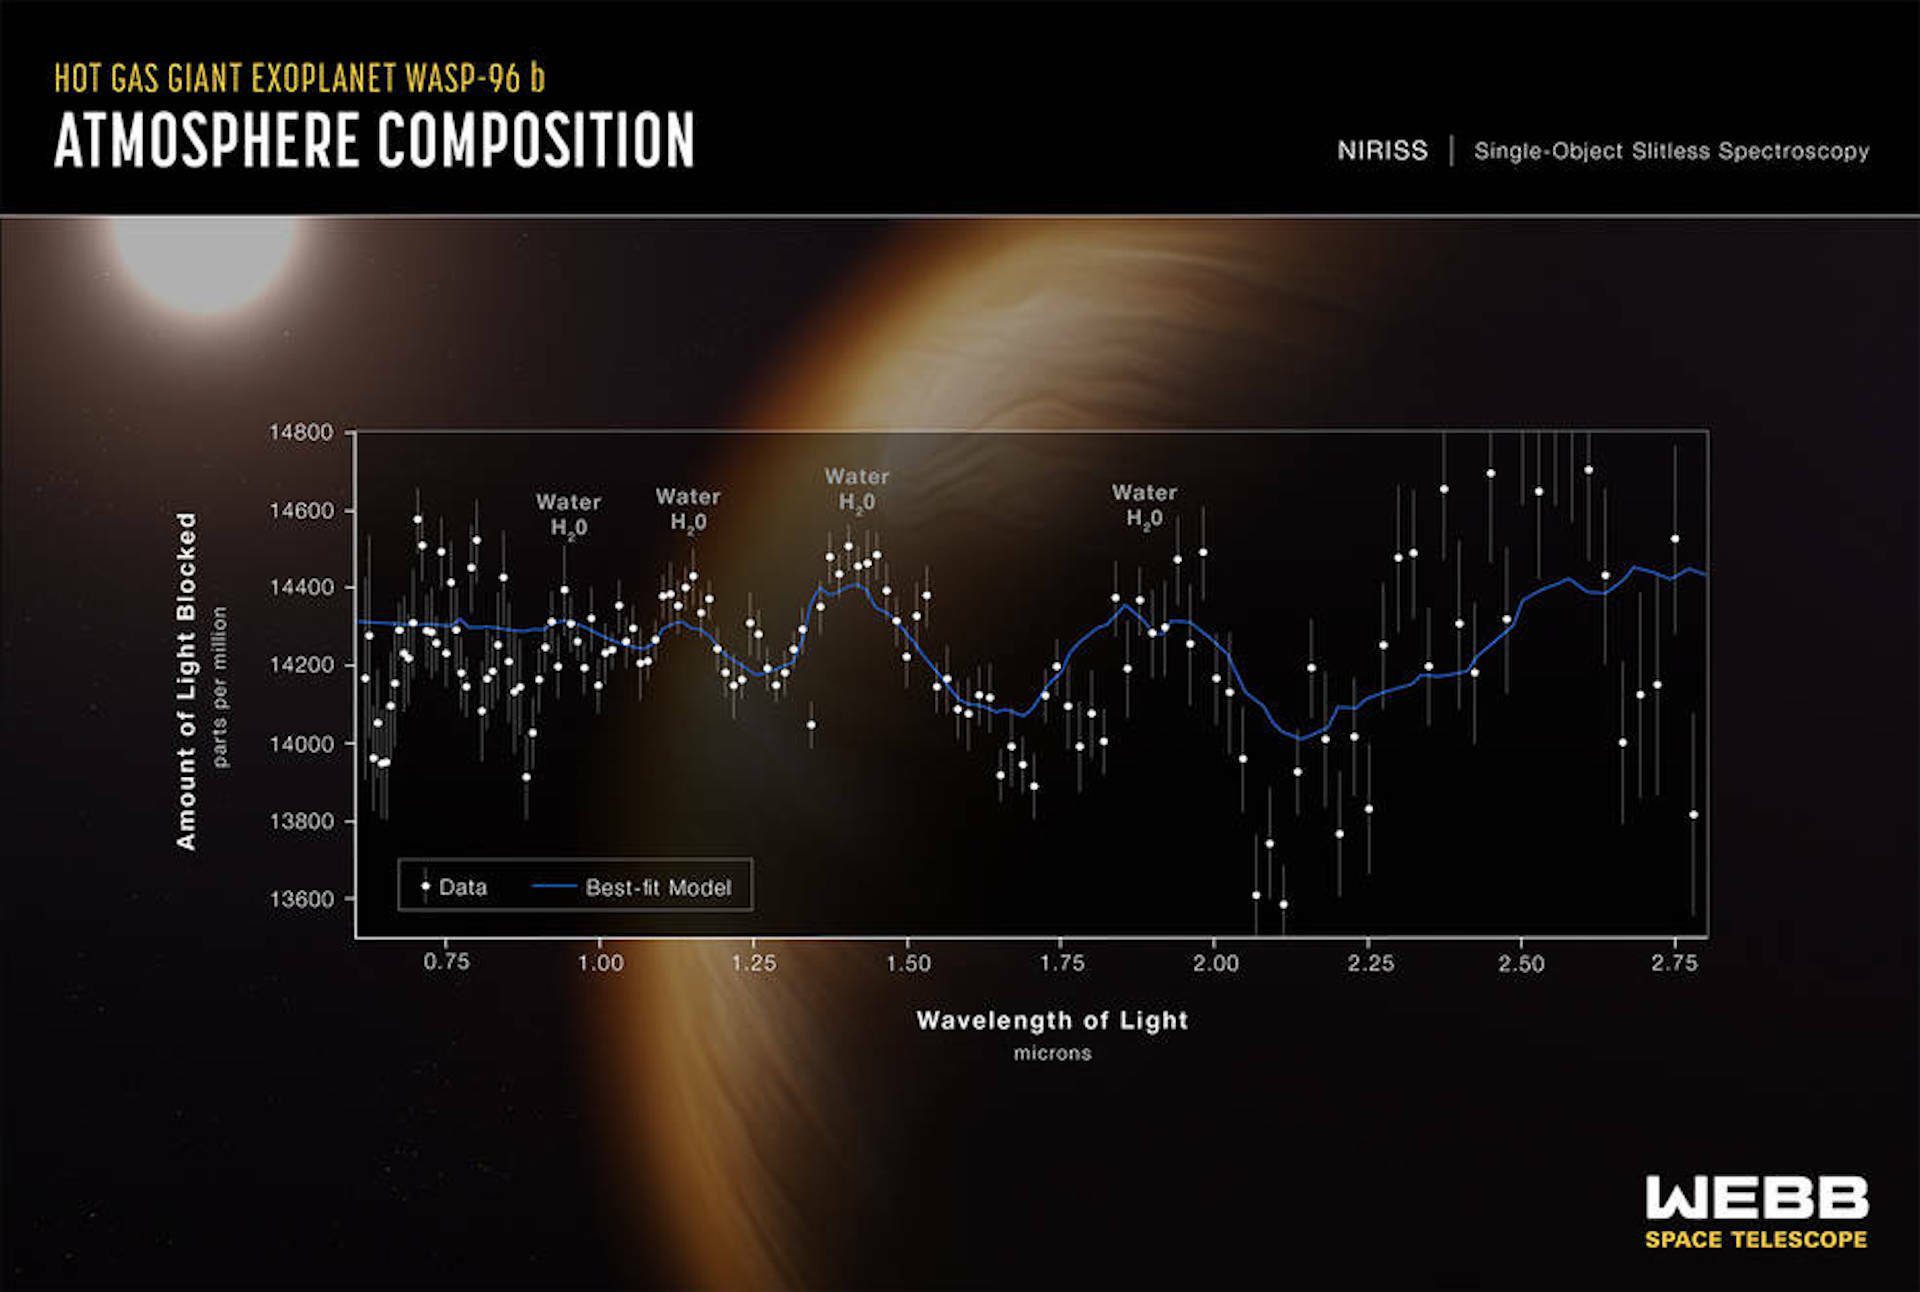 The James Webb Telescope shows the first spectrum of gases on an exoplanet.